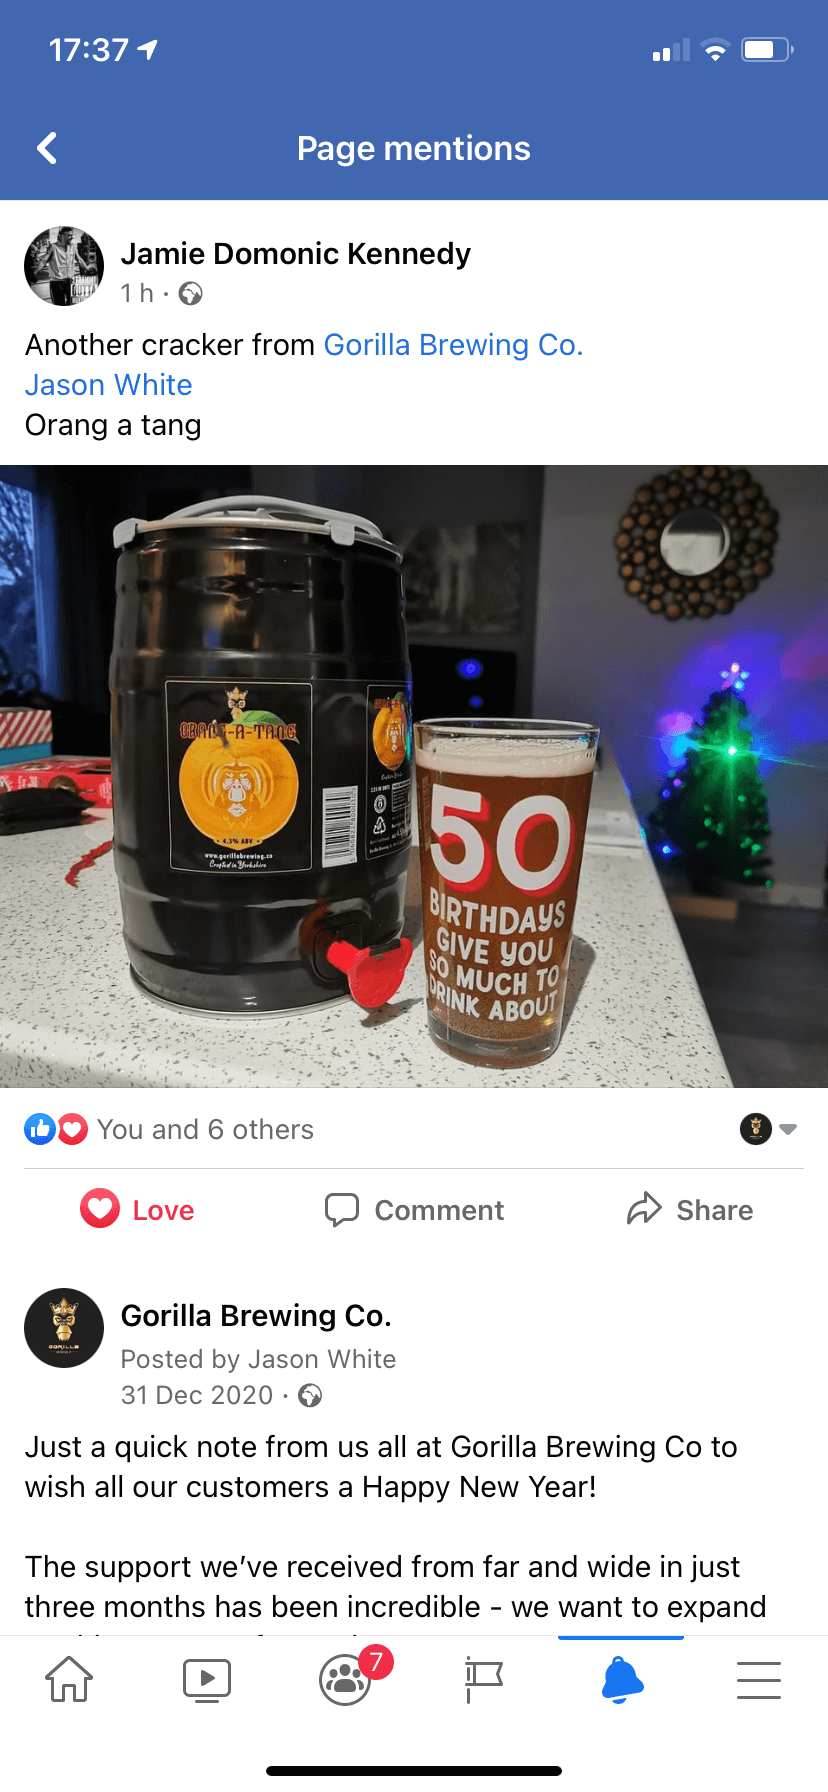 https://www.gorillabrewing.co.uk/wp-content/uploads/2021/01/image2.png